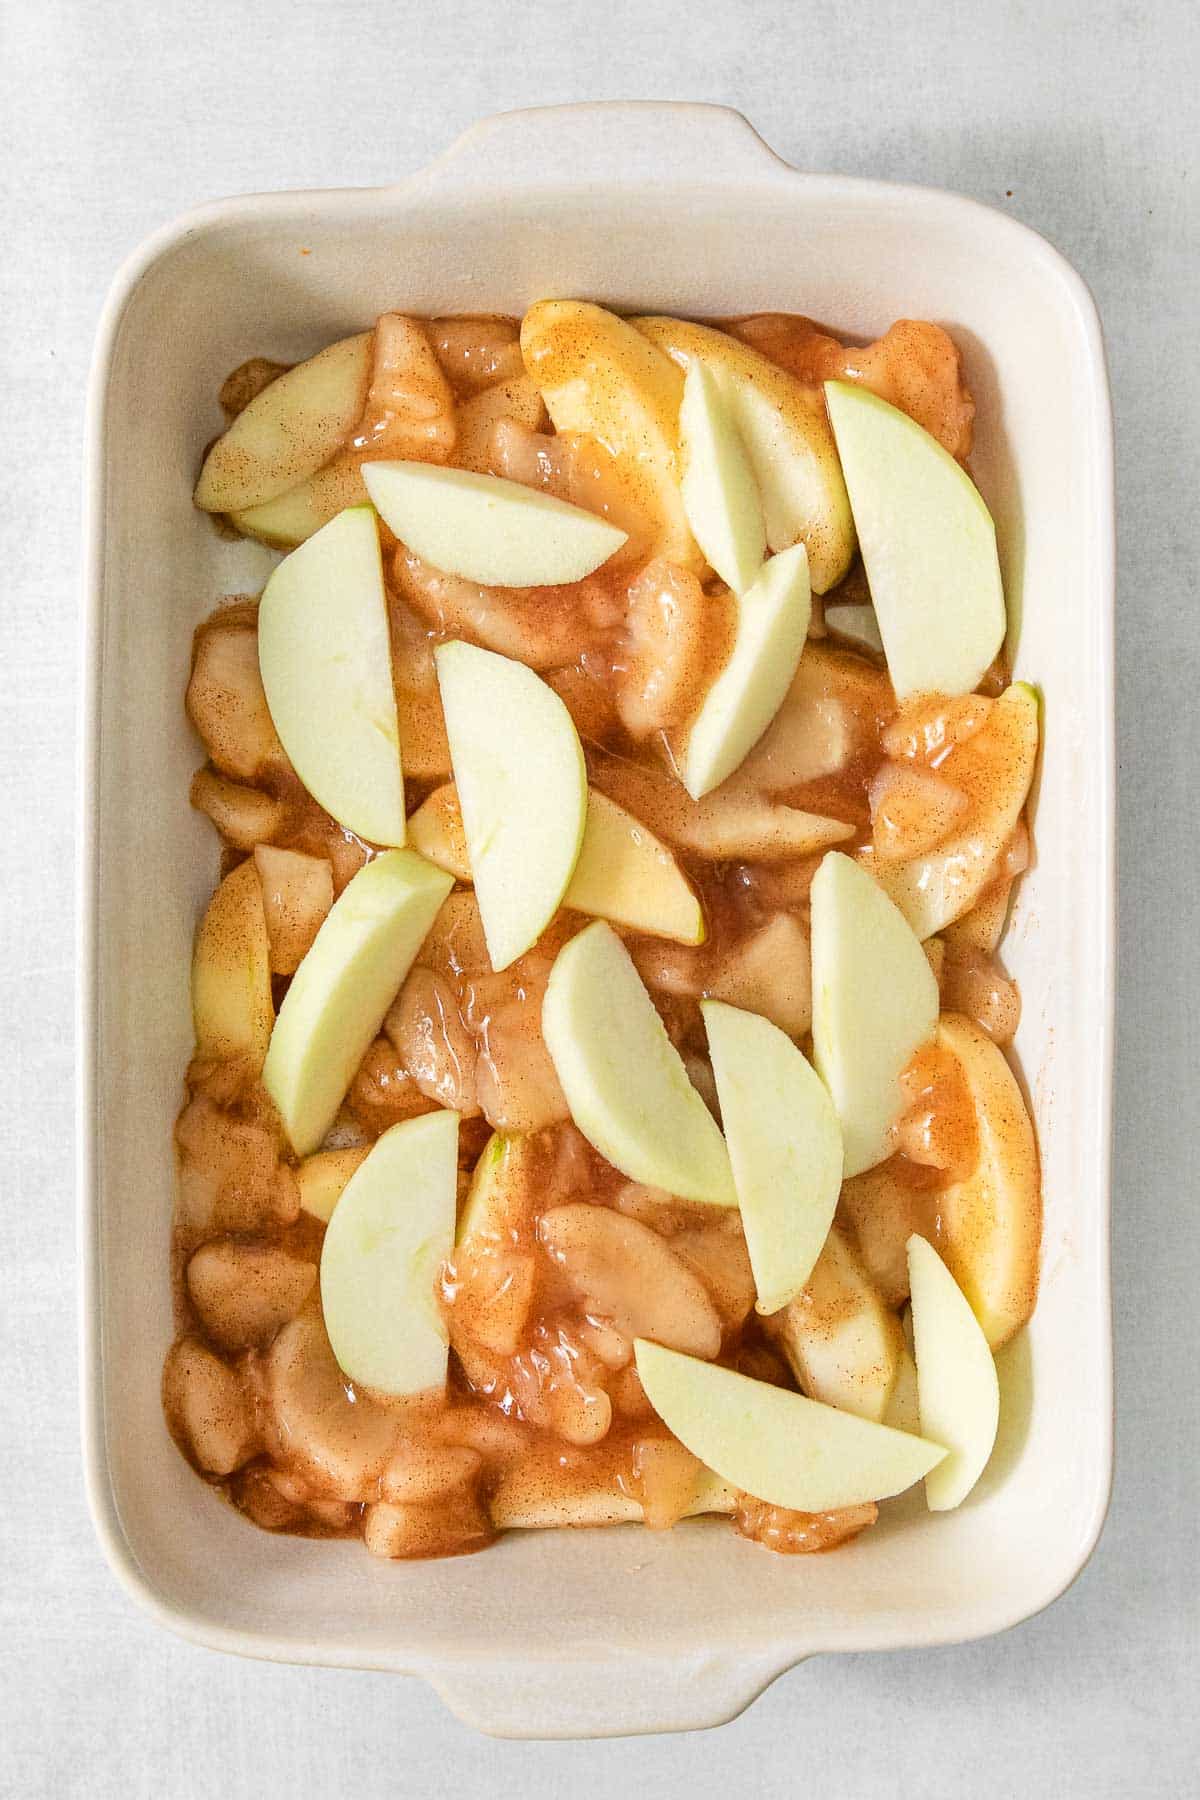 Sliced apples in a rectangle baking dish.